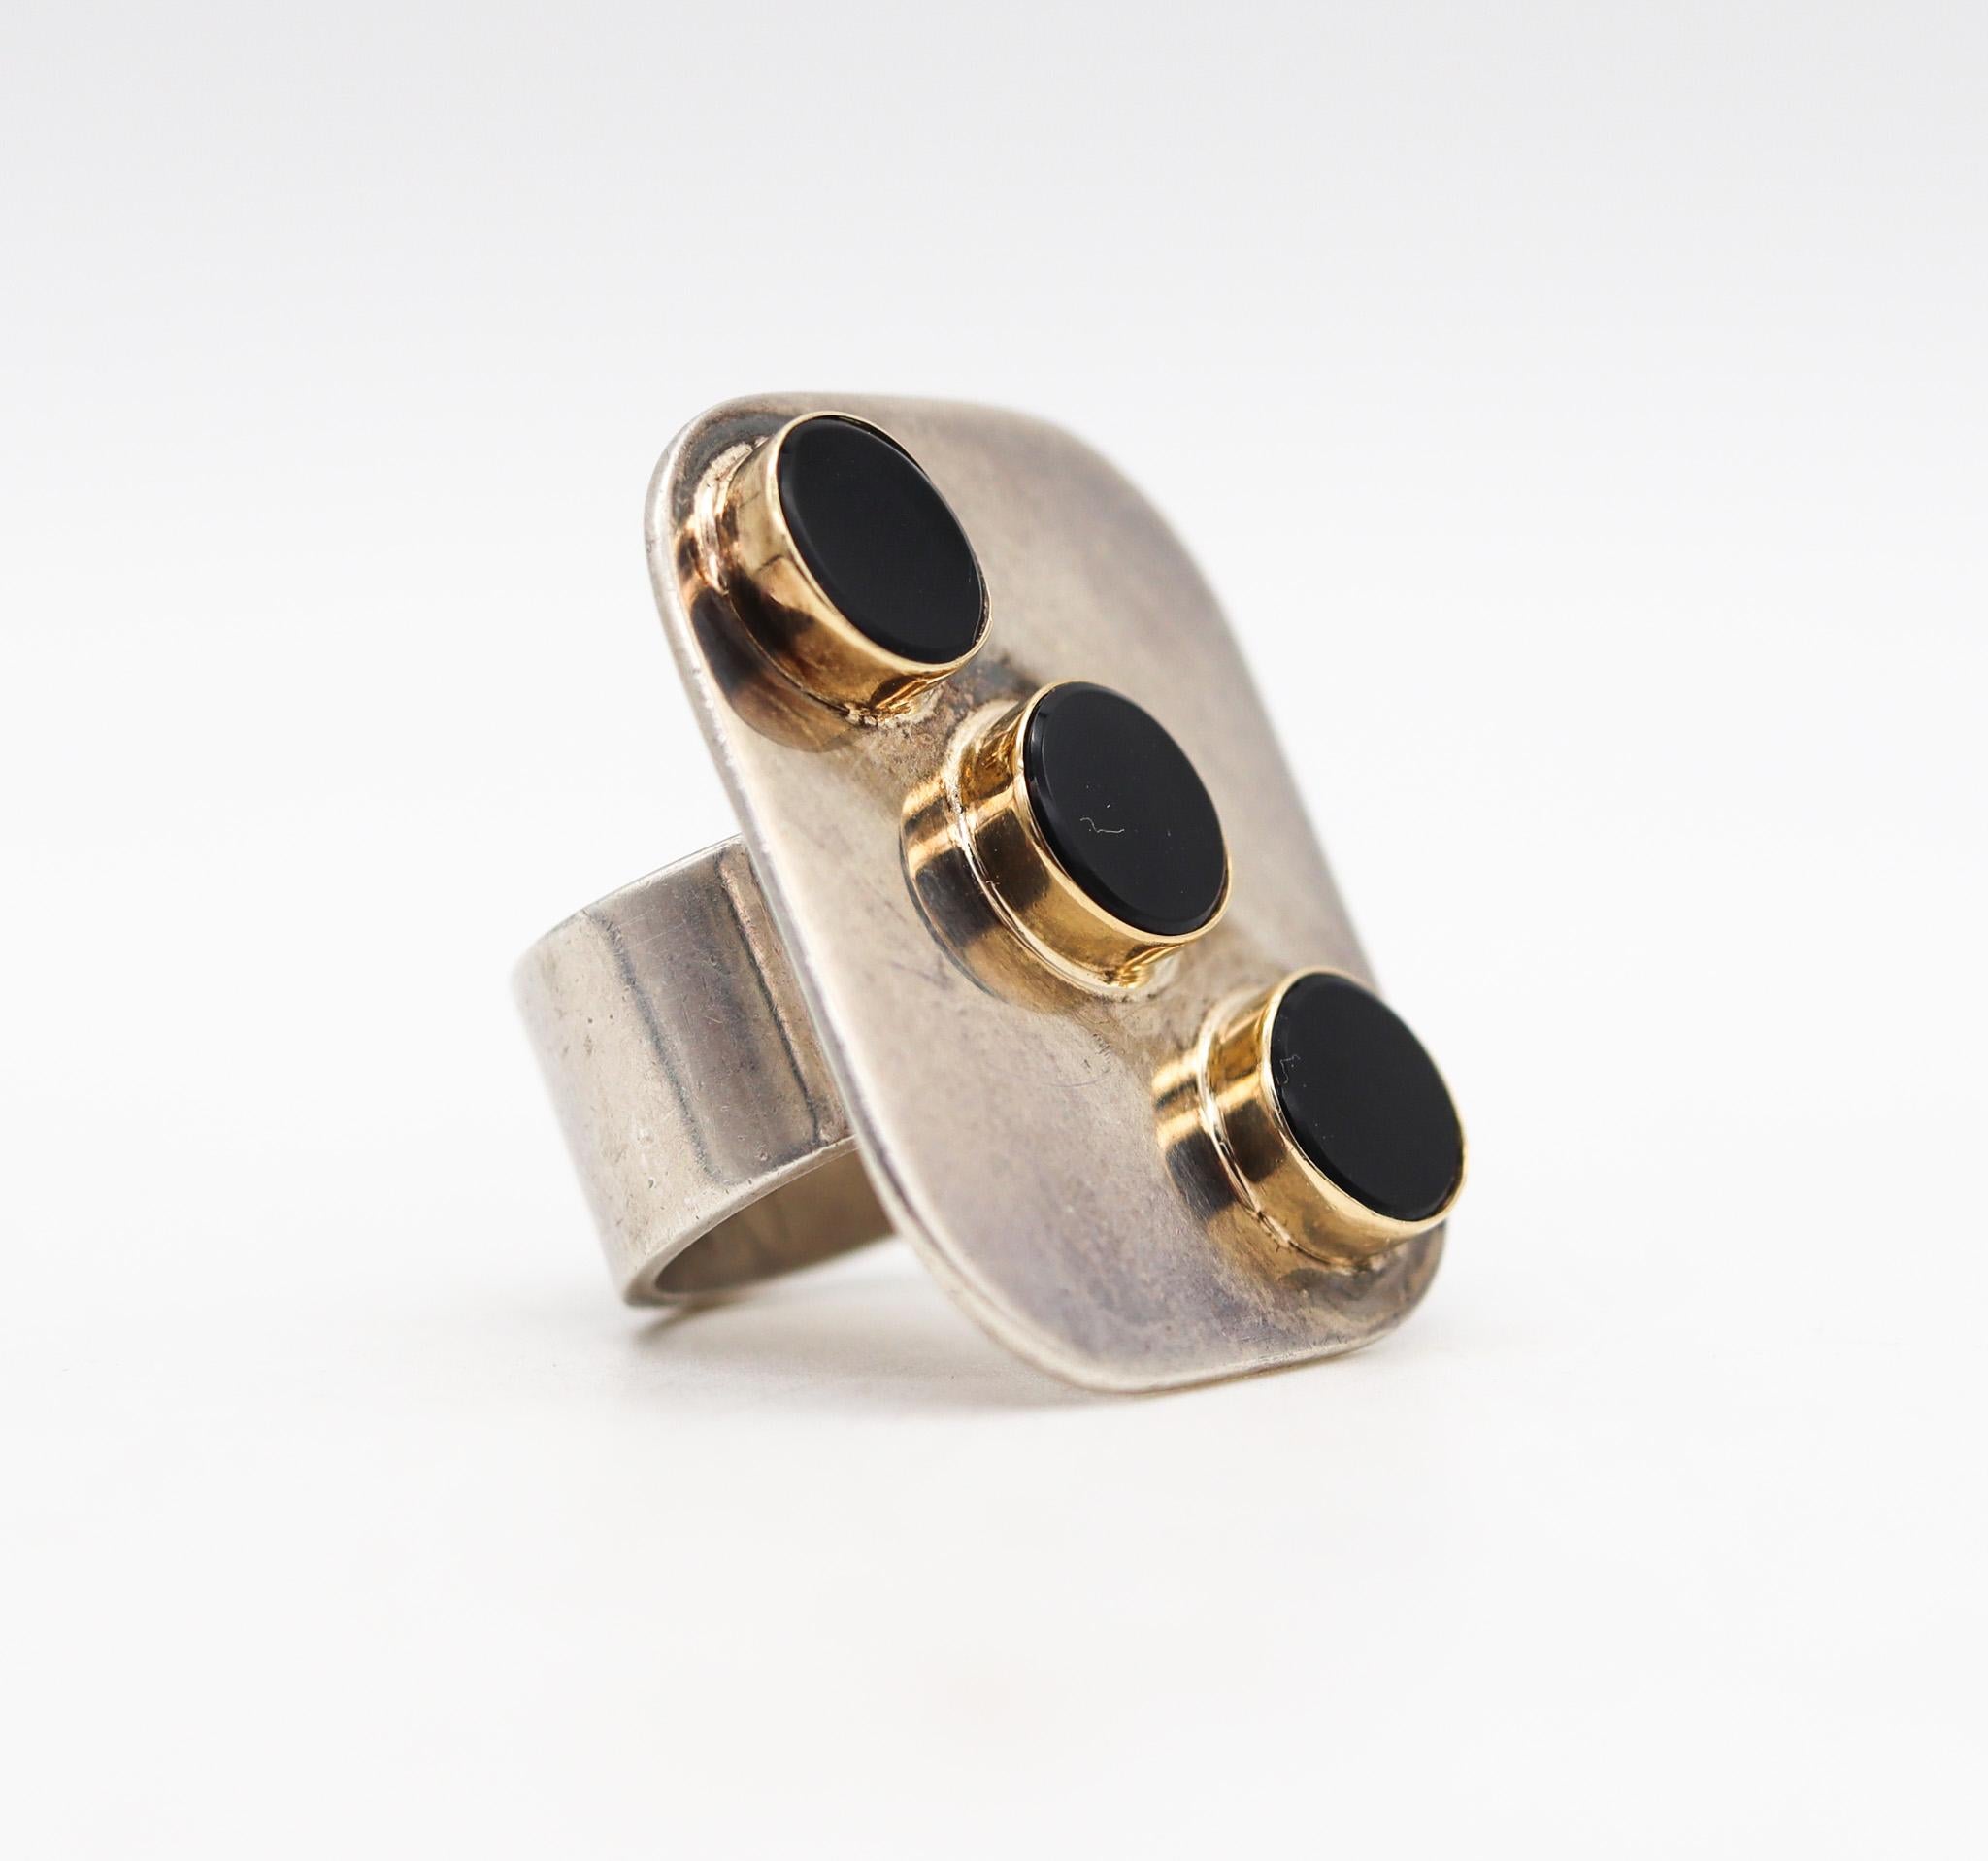 Modern Pierre Cardin 1970 Paris Geometric Ring in 14 Kt Gold Sterling Silver and Onyx For Sale